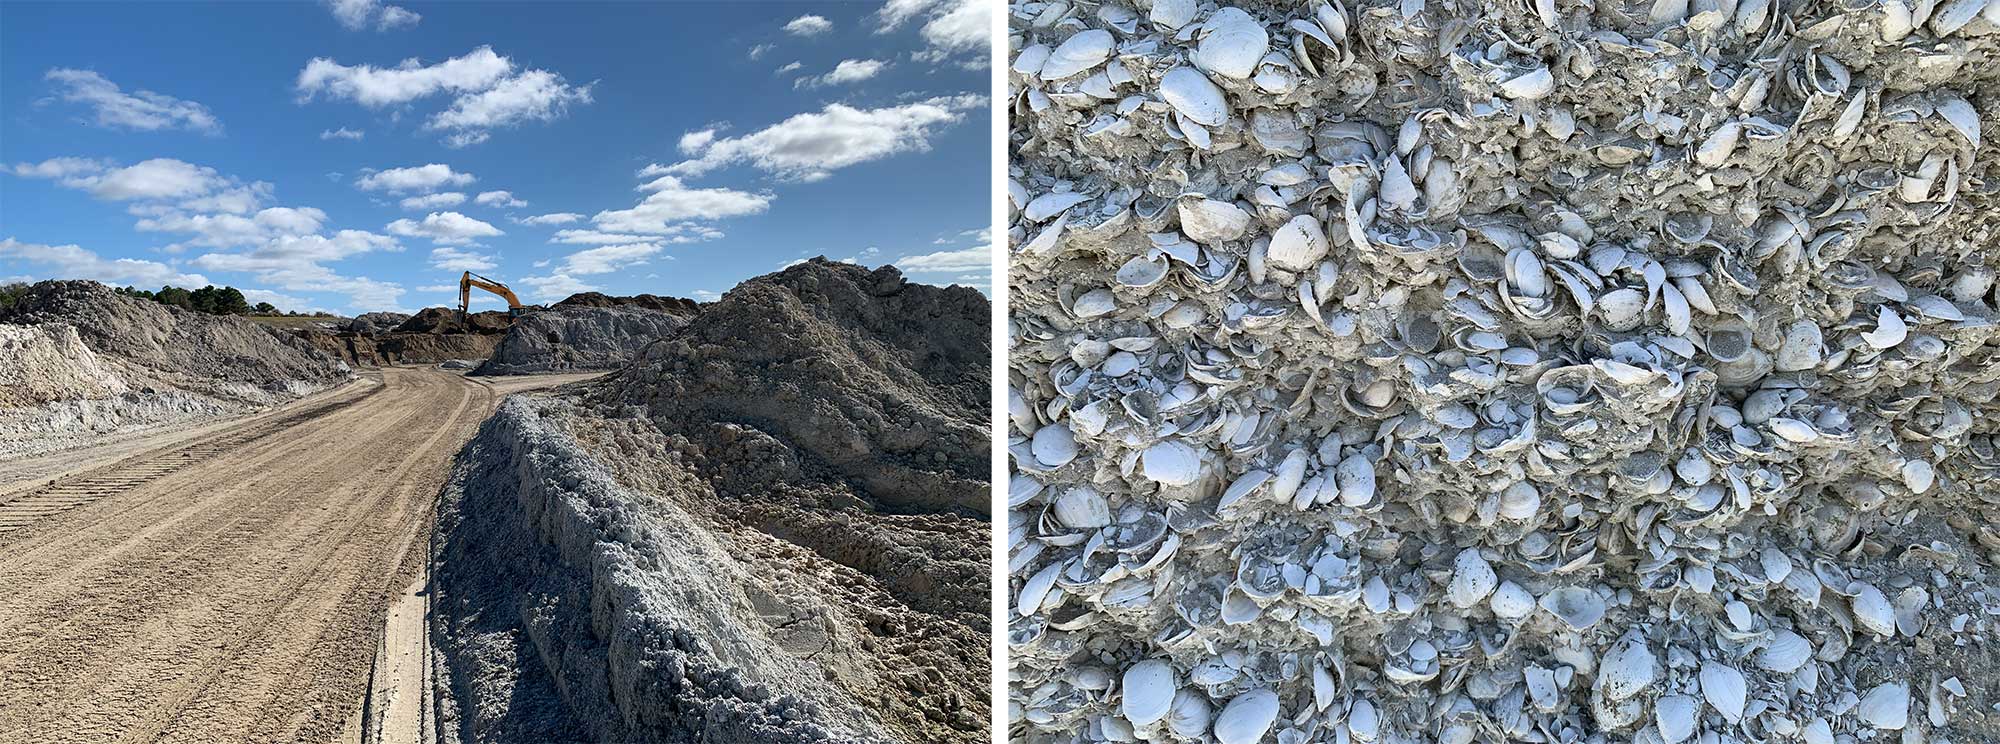 Image showing a photograph of an active aggregate quarry in Florida and a photograph of some of the fossil shells that are being quarried.